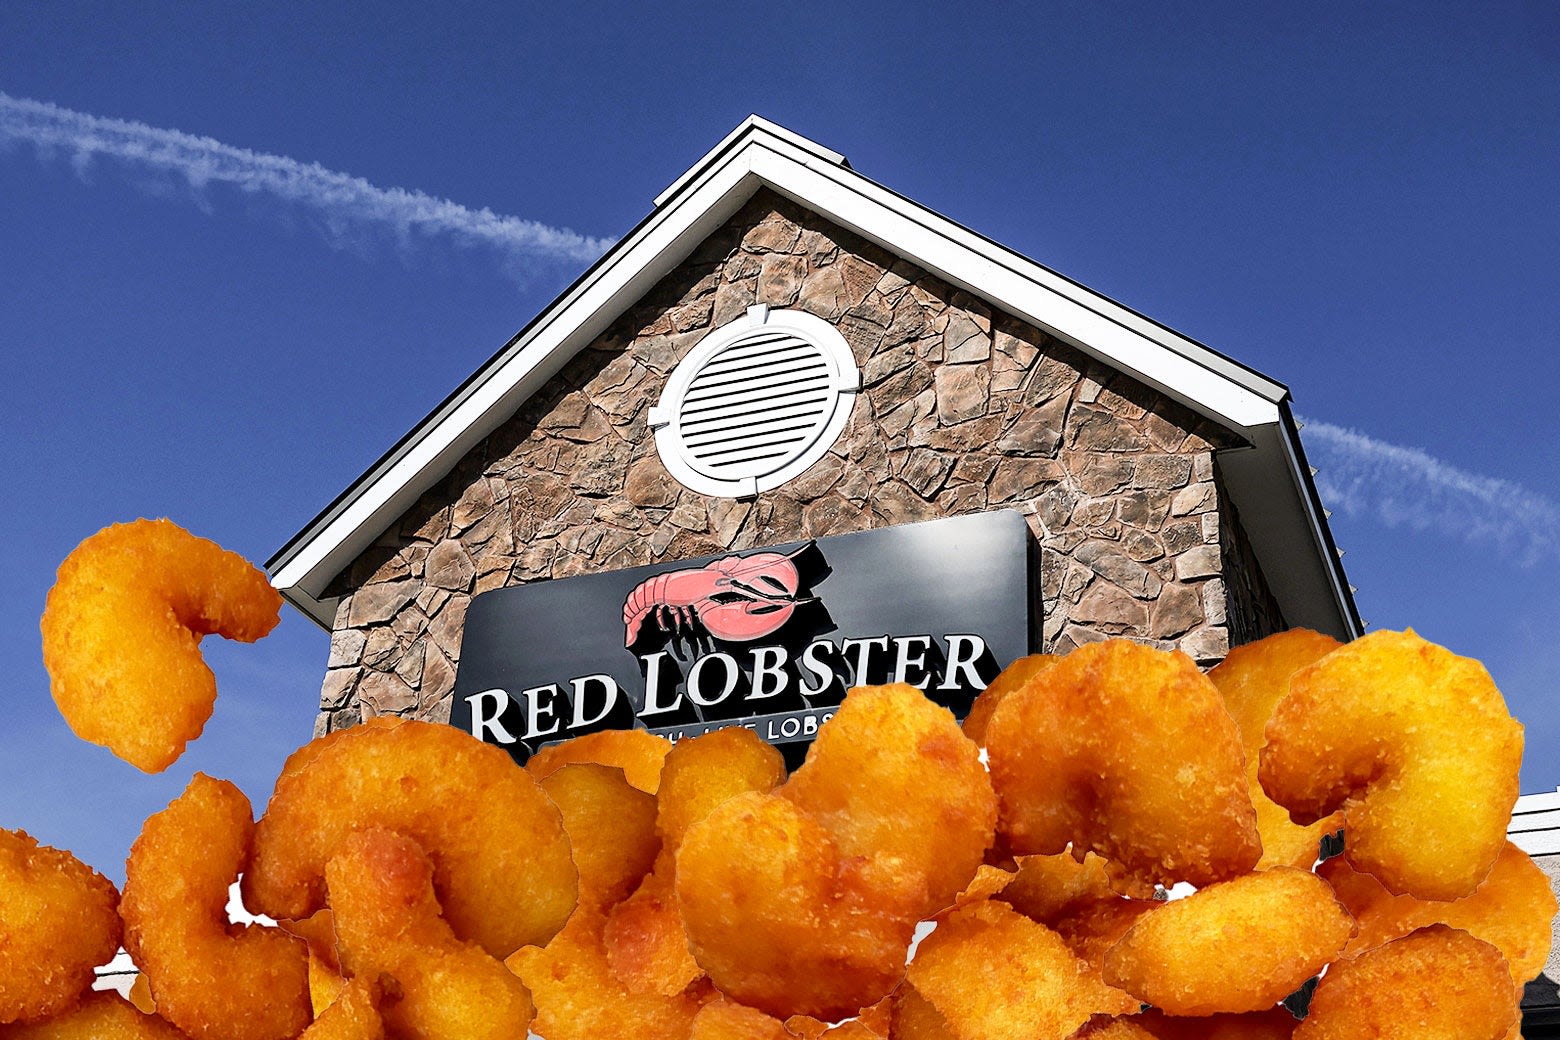 Fired Red Lobster Employees Have Quite the Tales About the “Endless Shrimp” Debacle